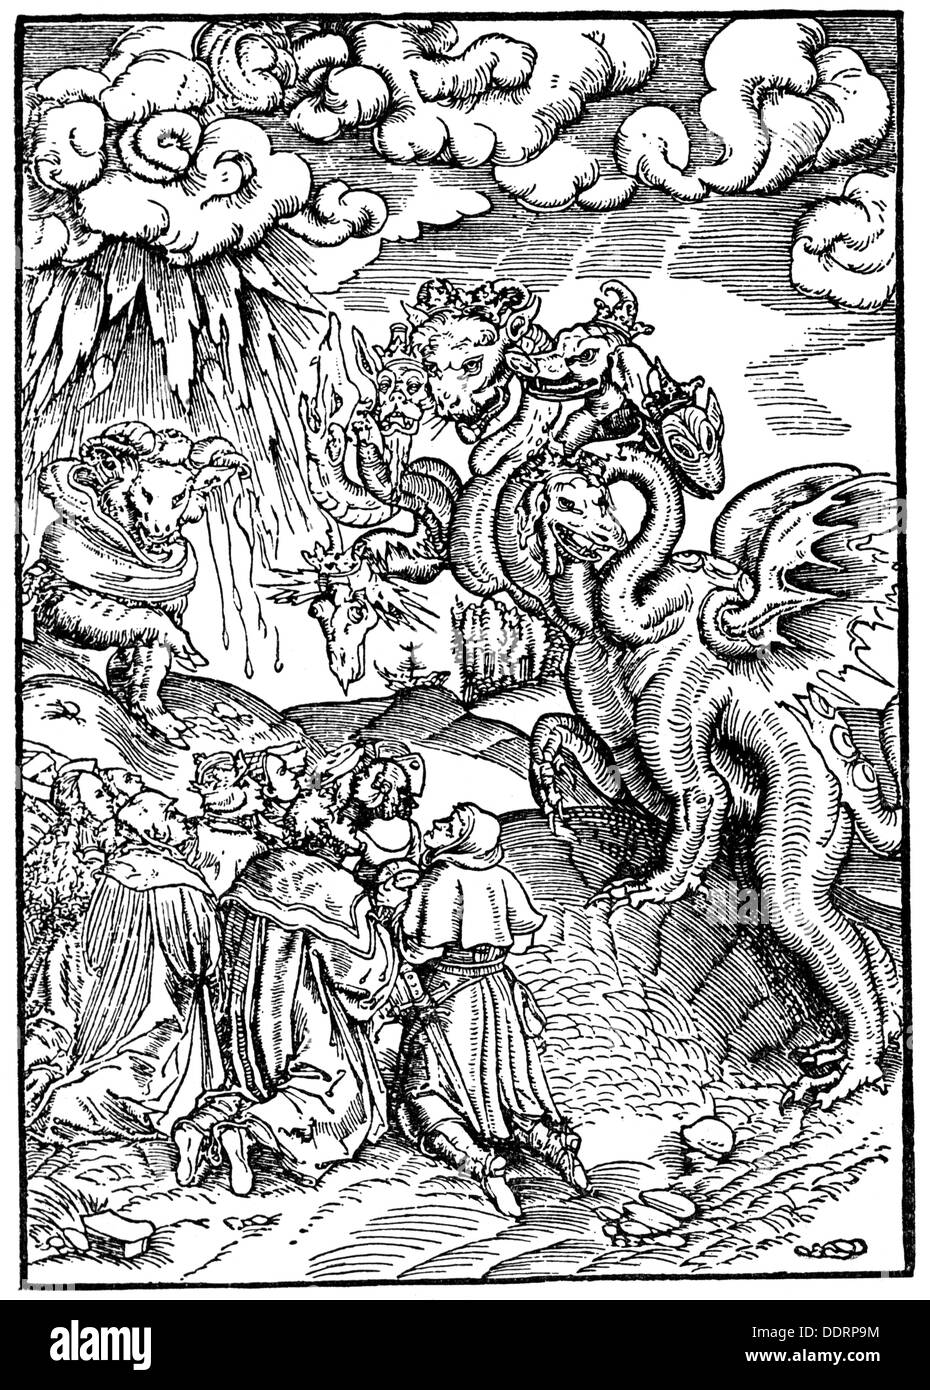 literature, Bible, September Bible, Book of Revelation, the seven-headed beast, woodcut by Lucas Cranch the Elder (circa 1475 - 1553), print: Melchior Lotter, Wittenberg, 1522, Additional-Rights-Clearences-Not Available Stock Photo